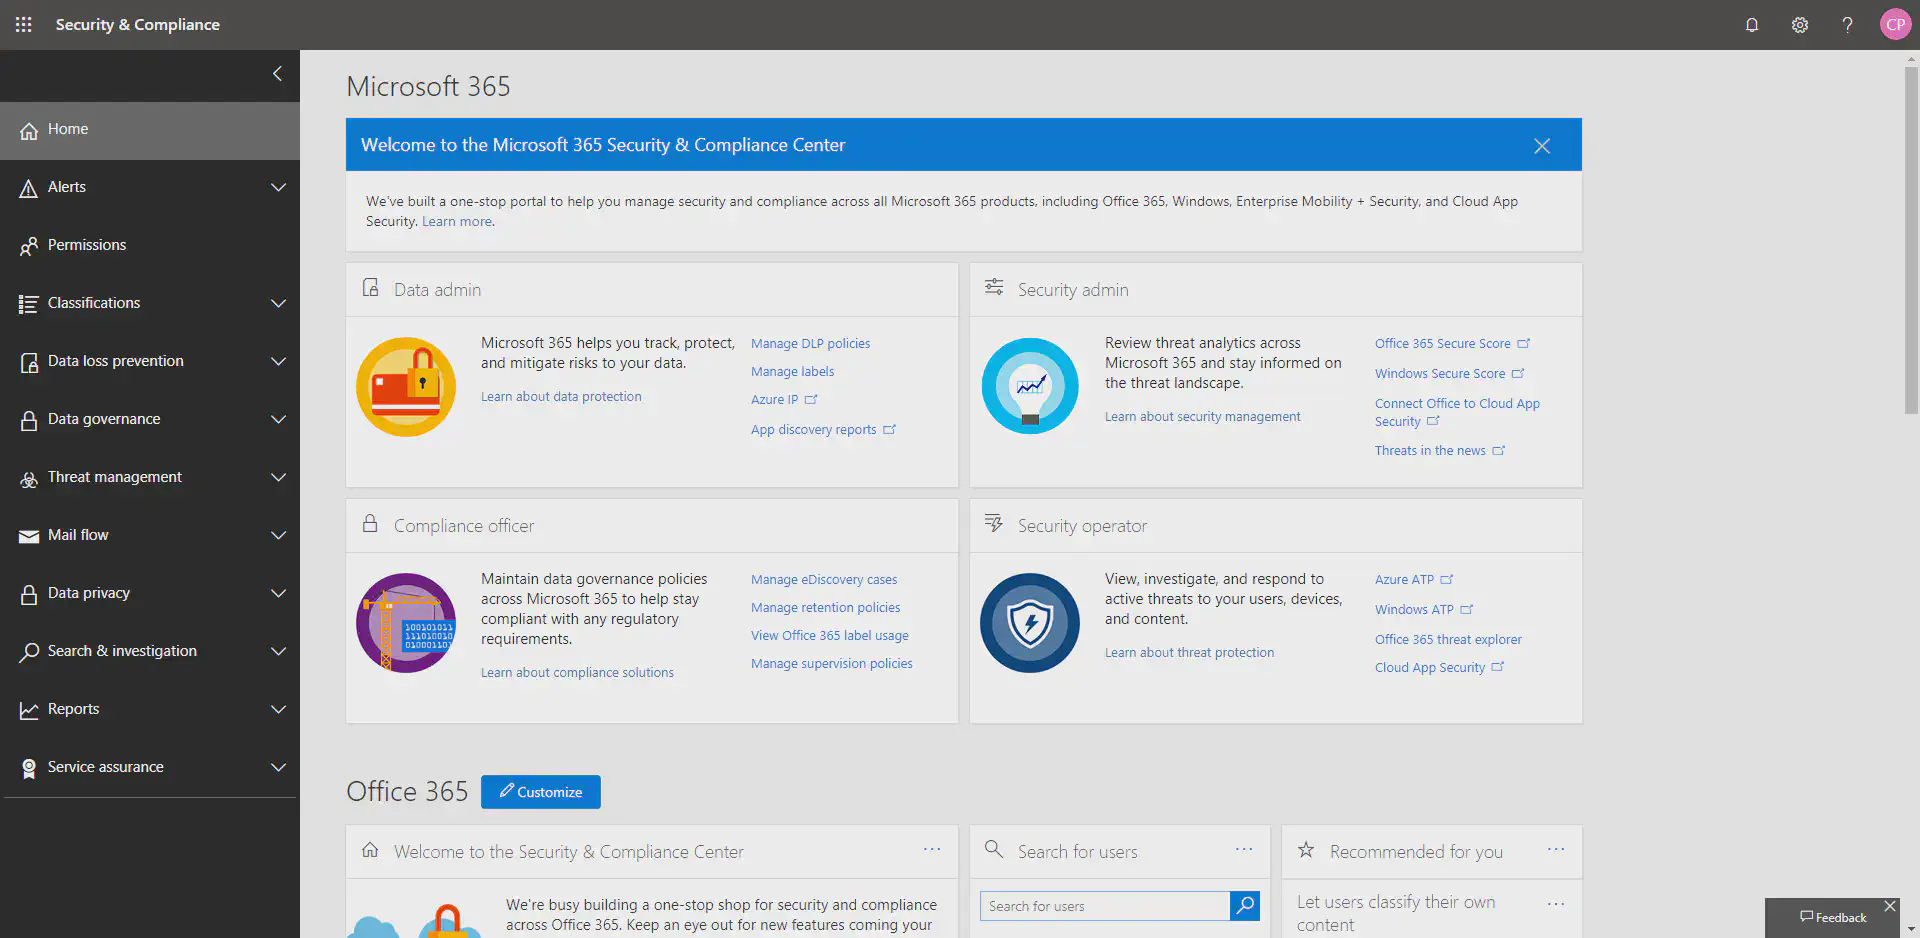 Office 365 Security & Compliance Center multi-tenancy (1/2: Subscribe to data)